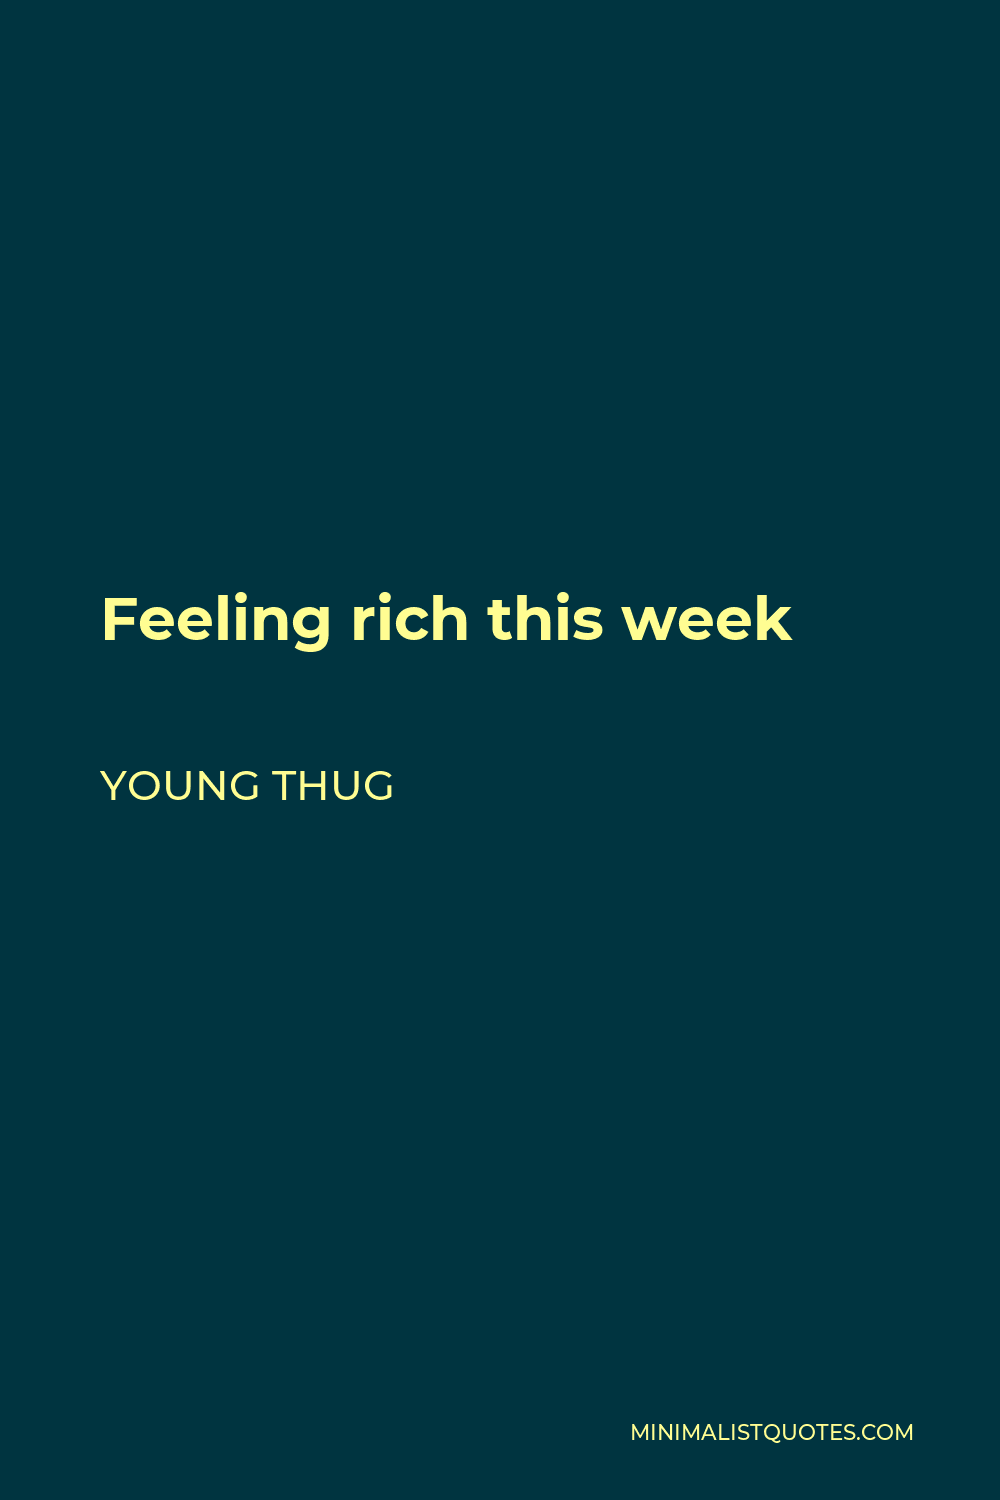 Young Thug Quote - Feeling rich this week